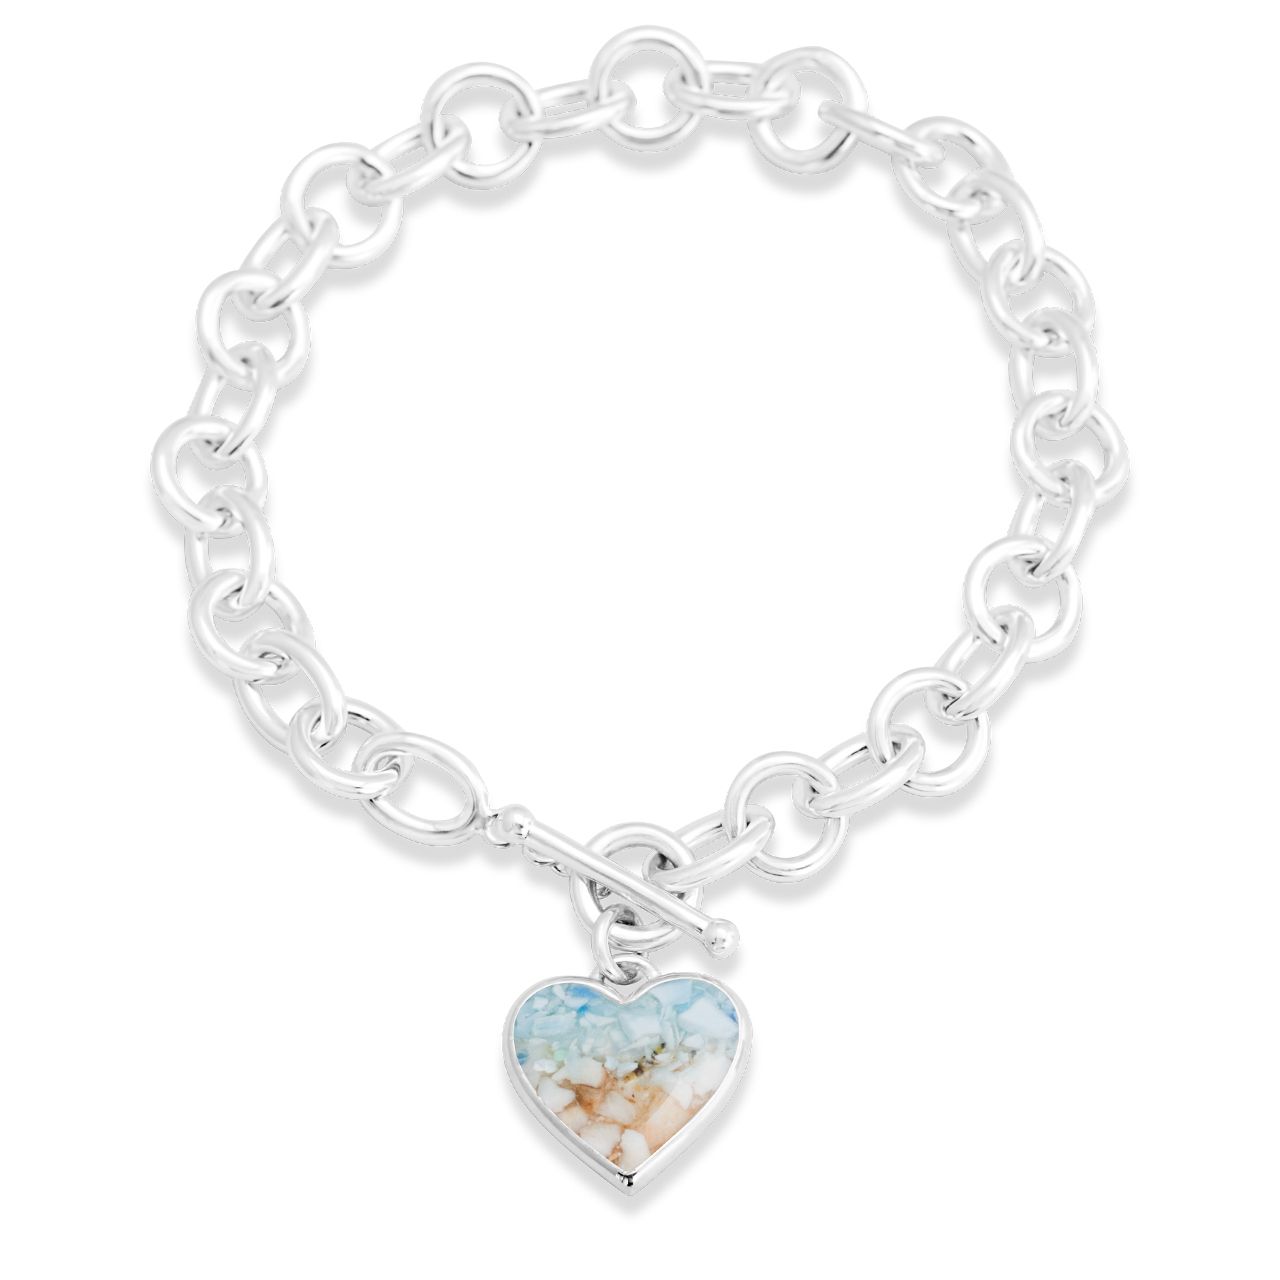 Product shot of the Dune x 4ocean Full Heart Toggle Bracelet - Hawaii Blue chain bracelet with heart pendant.